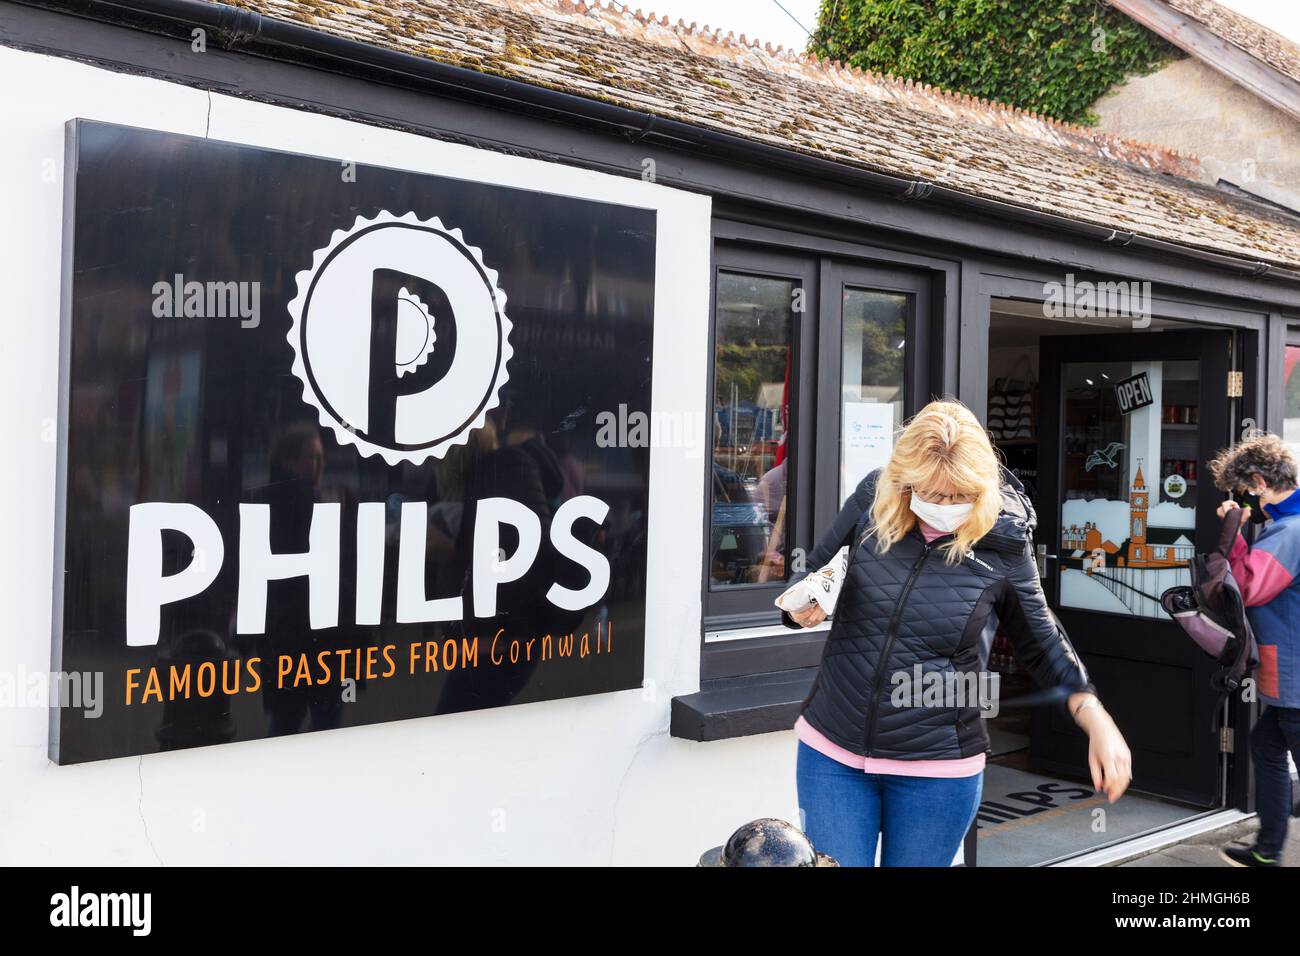 Philps Cornish pasty shop in Porthleven, Cornwall, UK, Philps Pasties - Traditional Cornish Pasty Bakers,Cornish Pasties,bakers,Philps,Cornish,food, Stock Photo